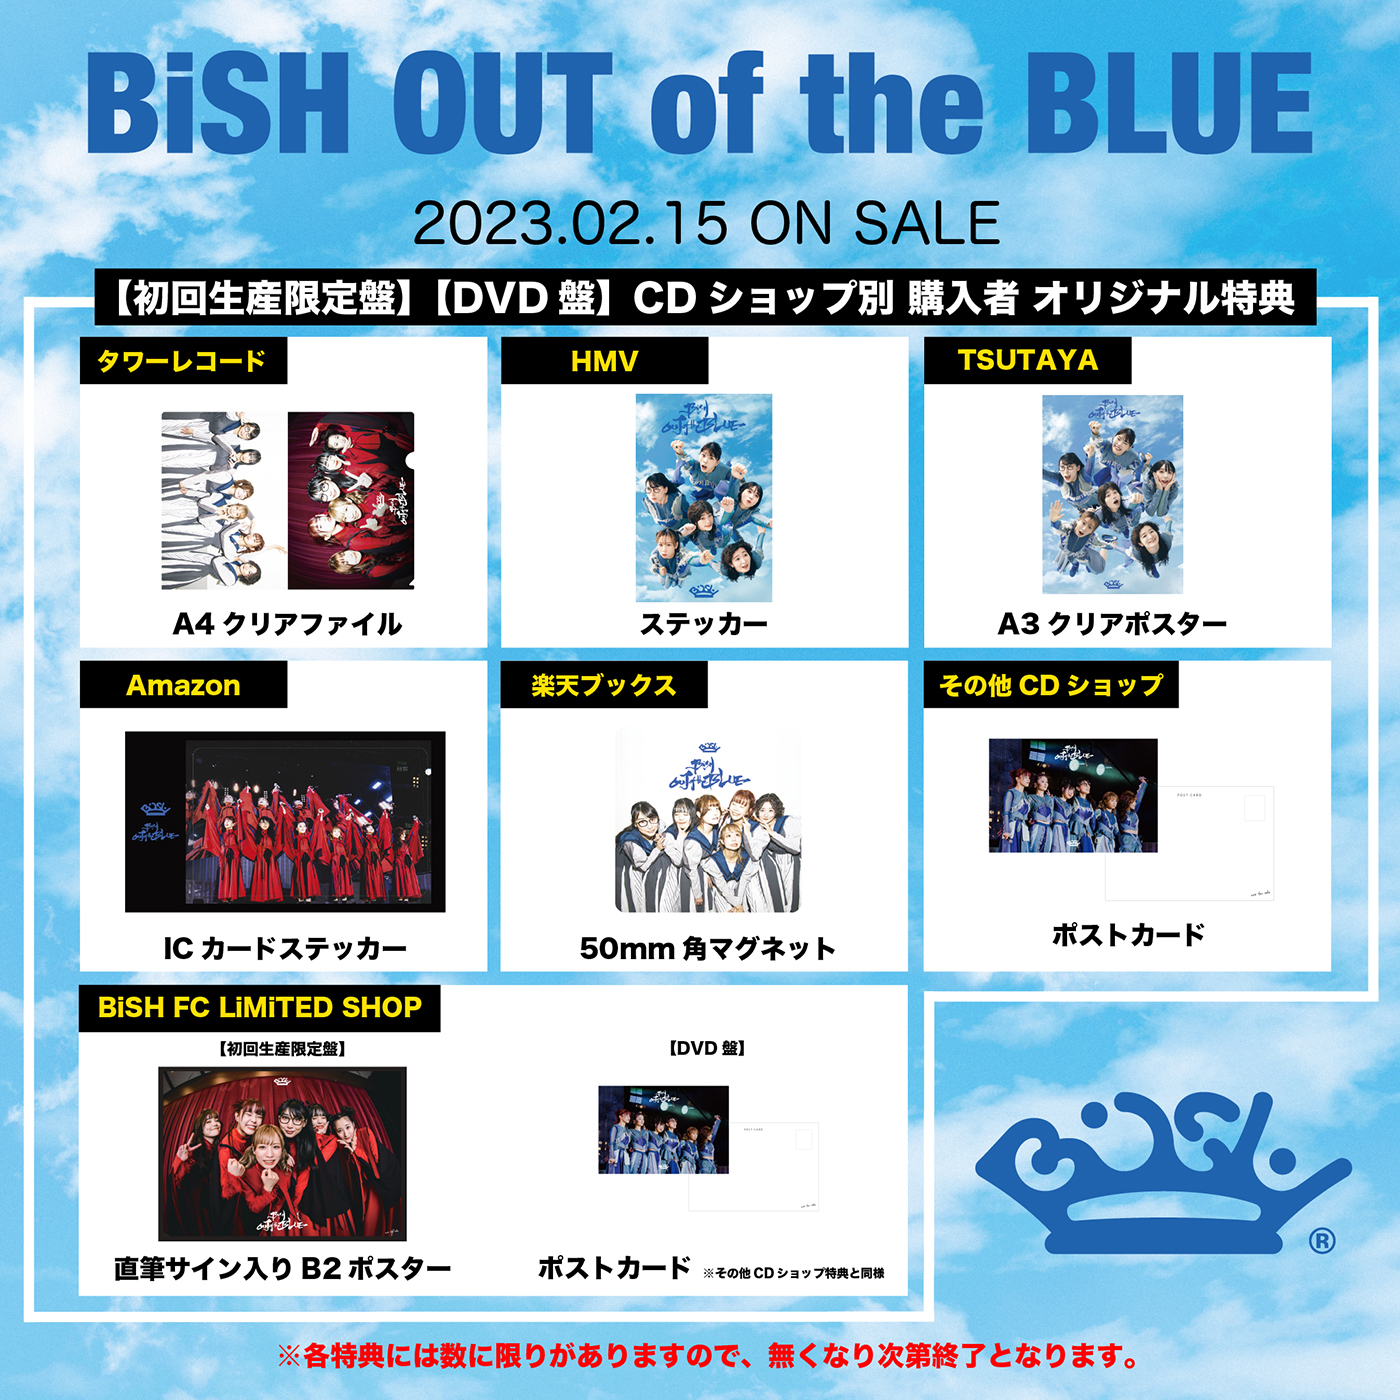 BiSH、ライブ映像作品『BiSH OUT of the BLUE』のアートワーク＆購入者特典画像を公開 - 画像一覧（3/4）